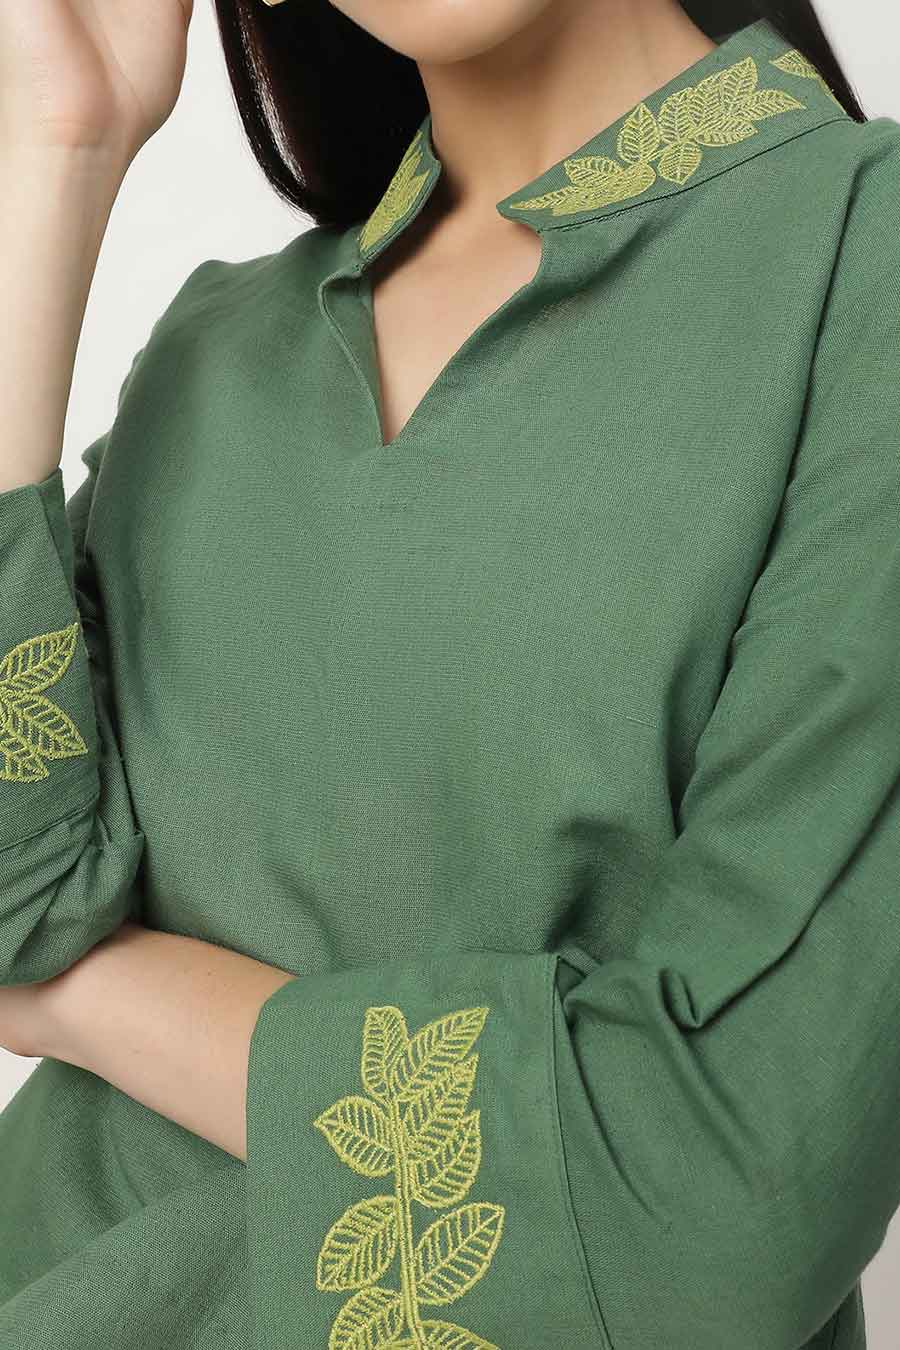 Cecily Green Embroidered Top